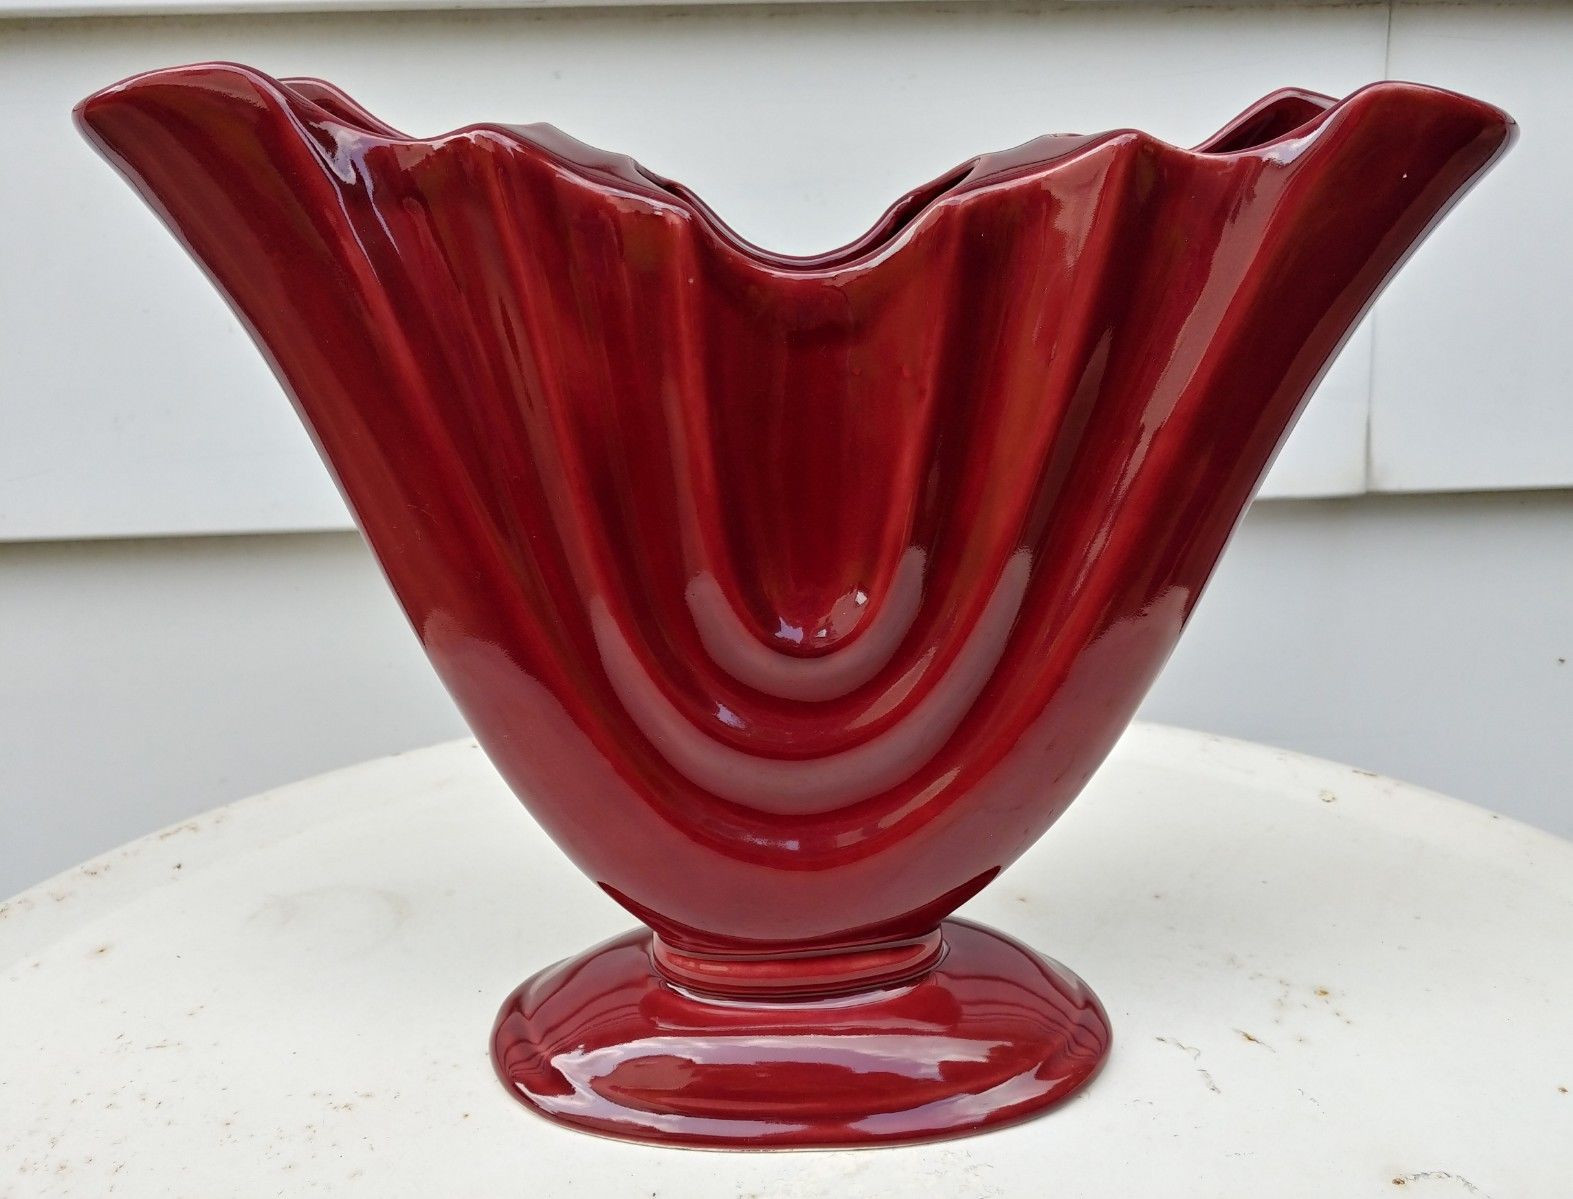 25 Trendy Gladiolus Vase for Sale 2022 free download gladiolus vase for sale of vintage red camark mid century deco fan shaped gladiolus vase with intended for 1 of 9 see more